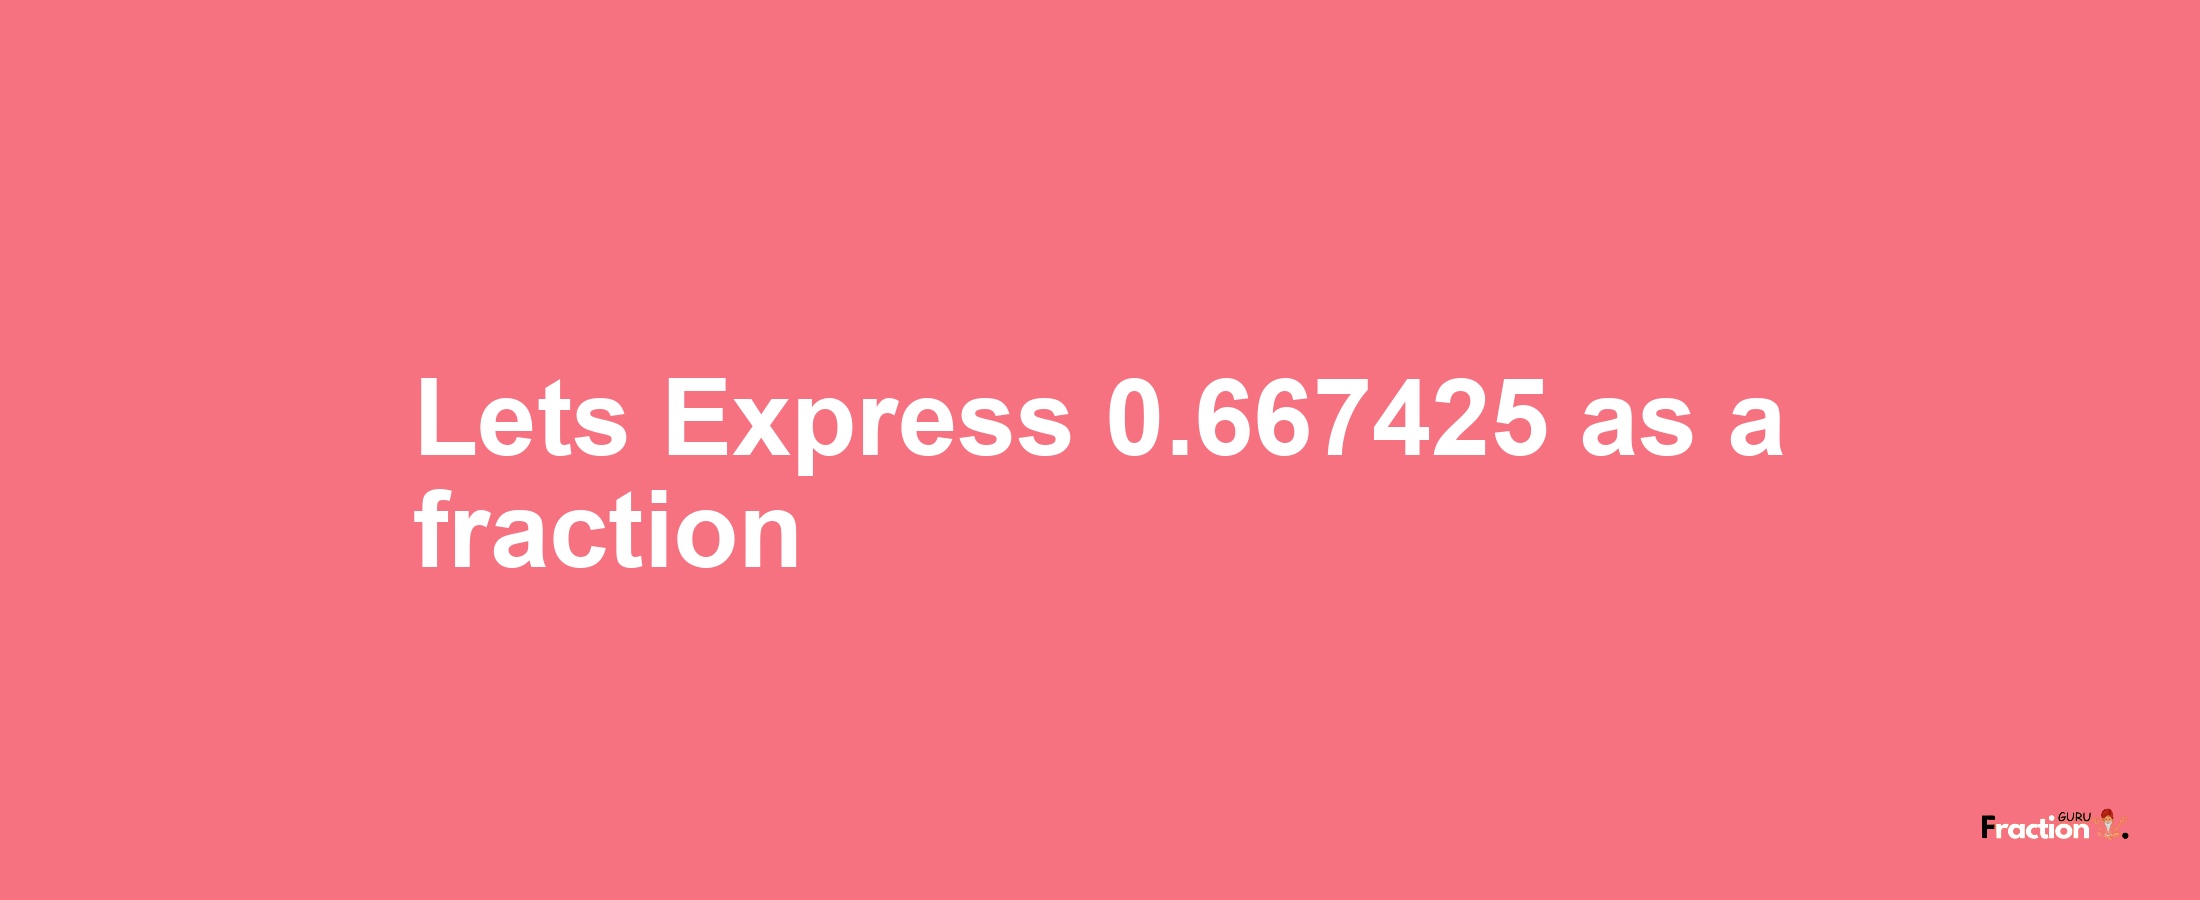 Lets Express 0.667425 as afraction